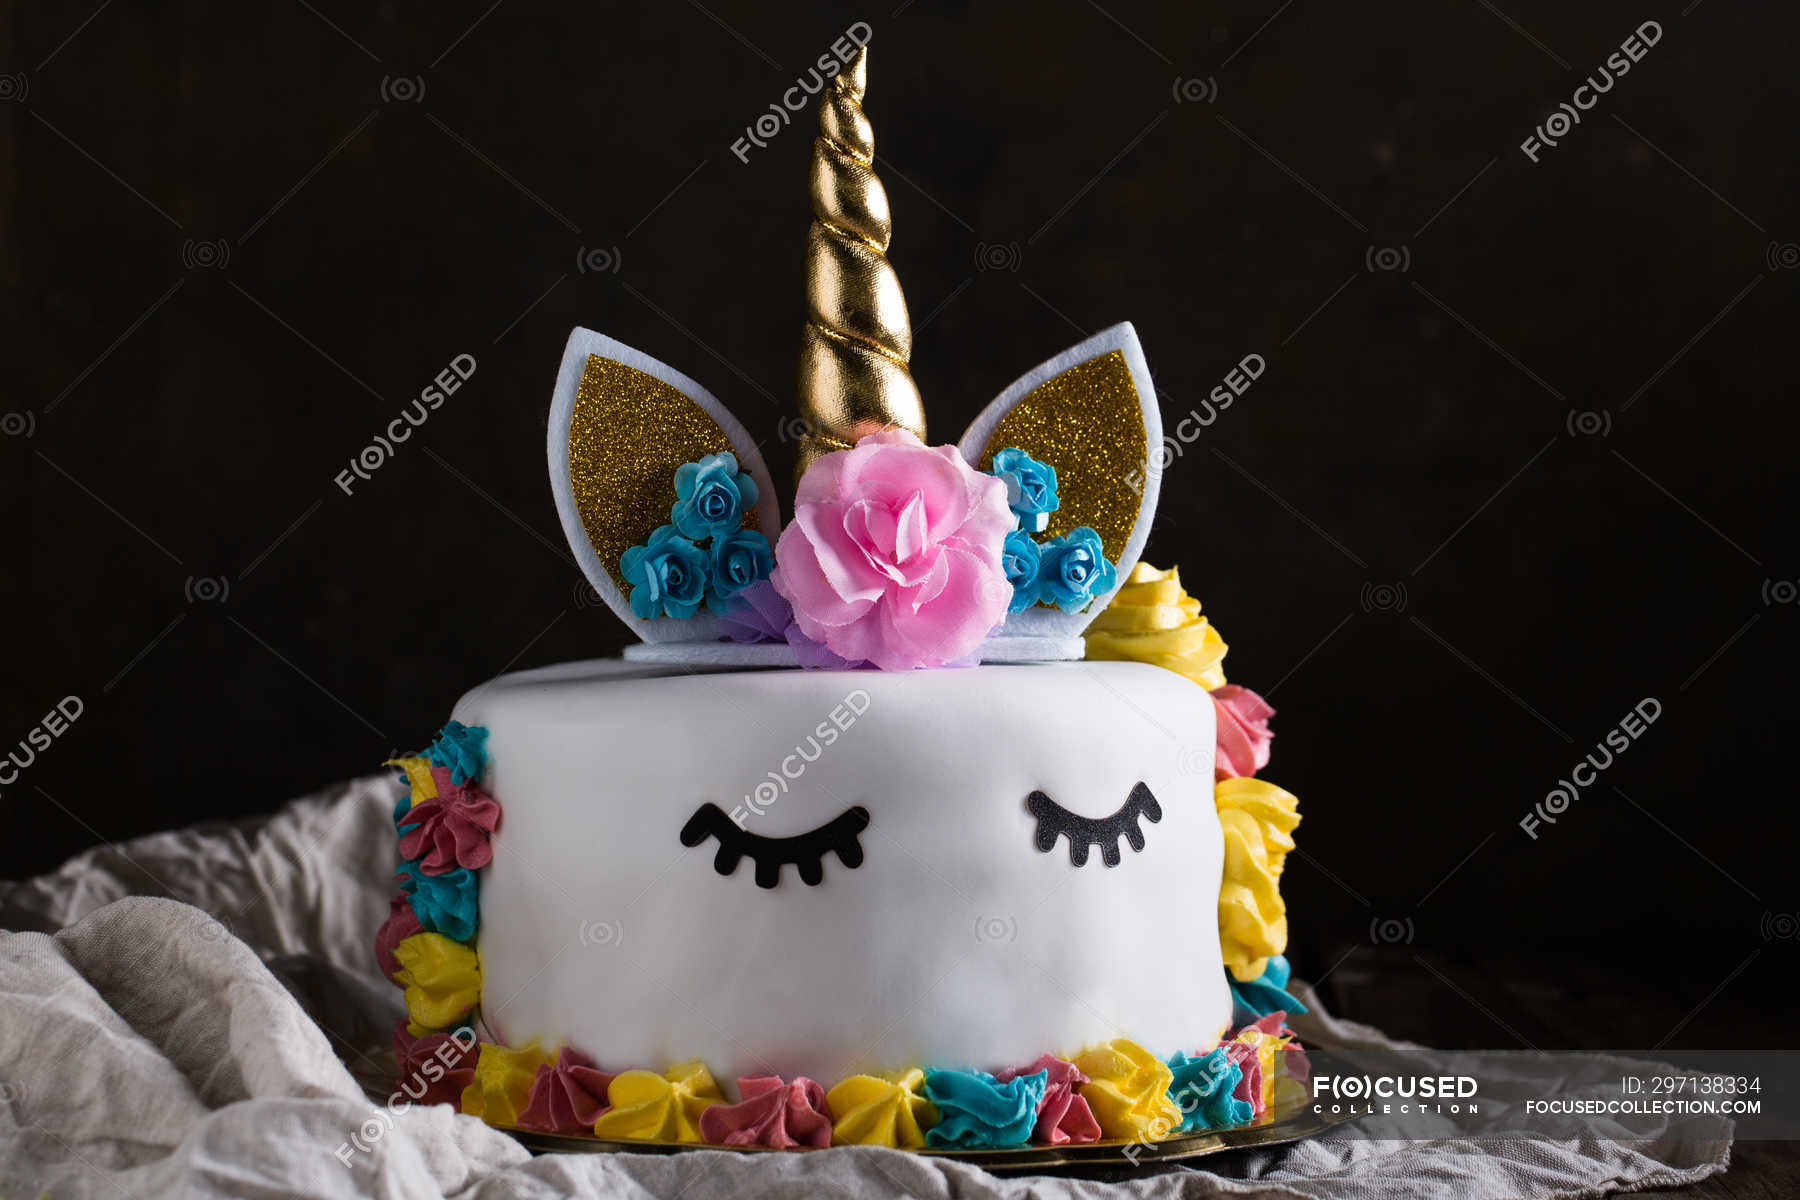 Cute unicorn cake with painted closed eyes on cloth on black background —  decoration, gourmet - Stock Photo | #297138334